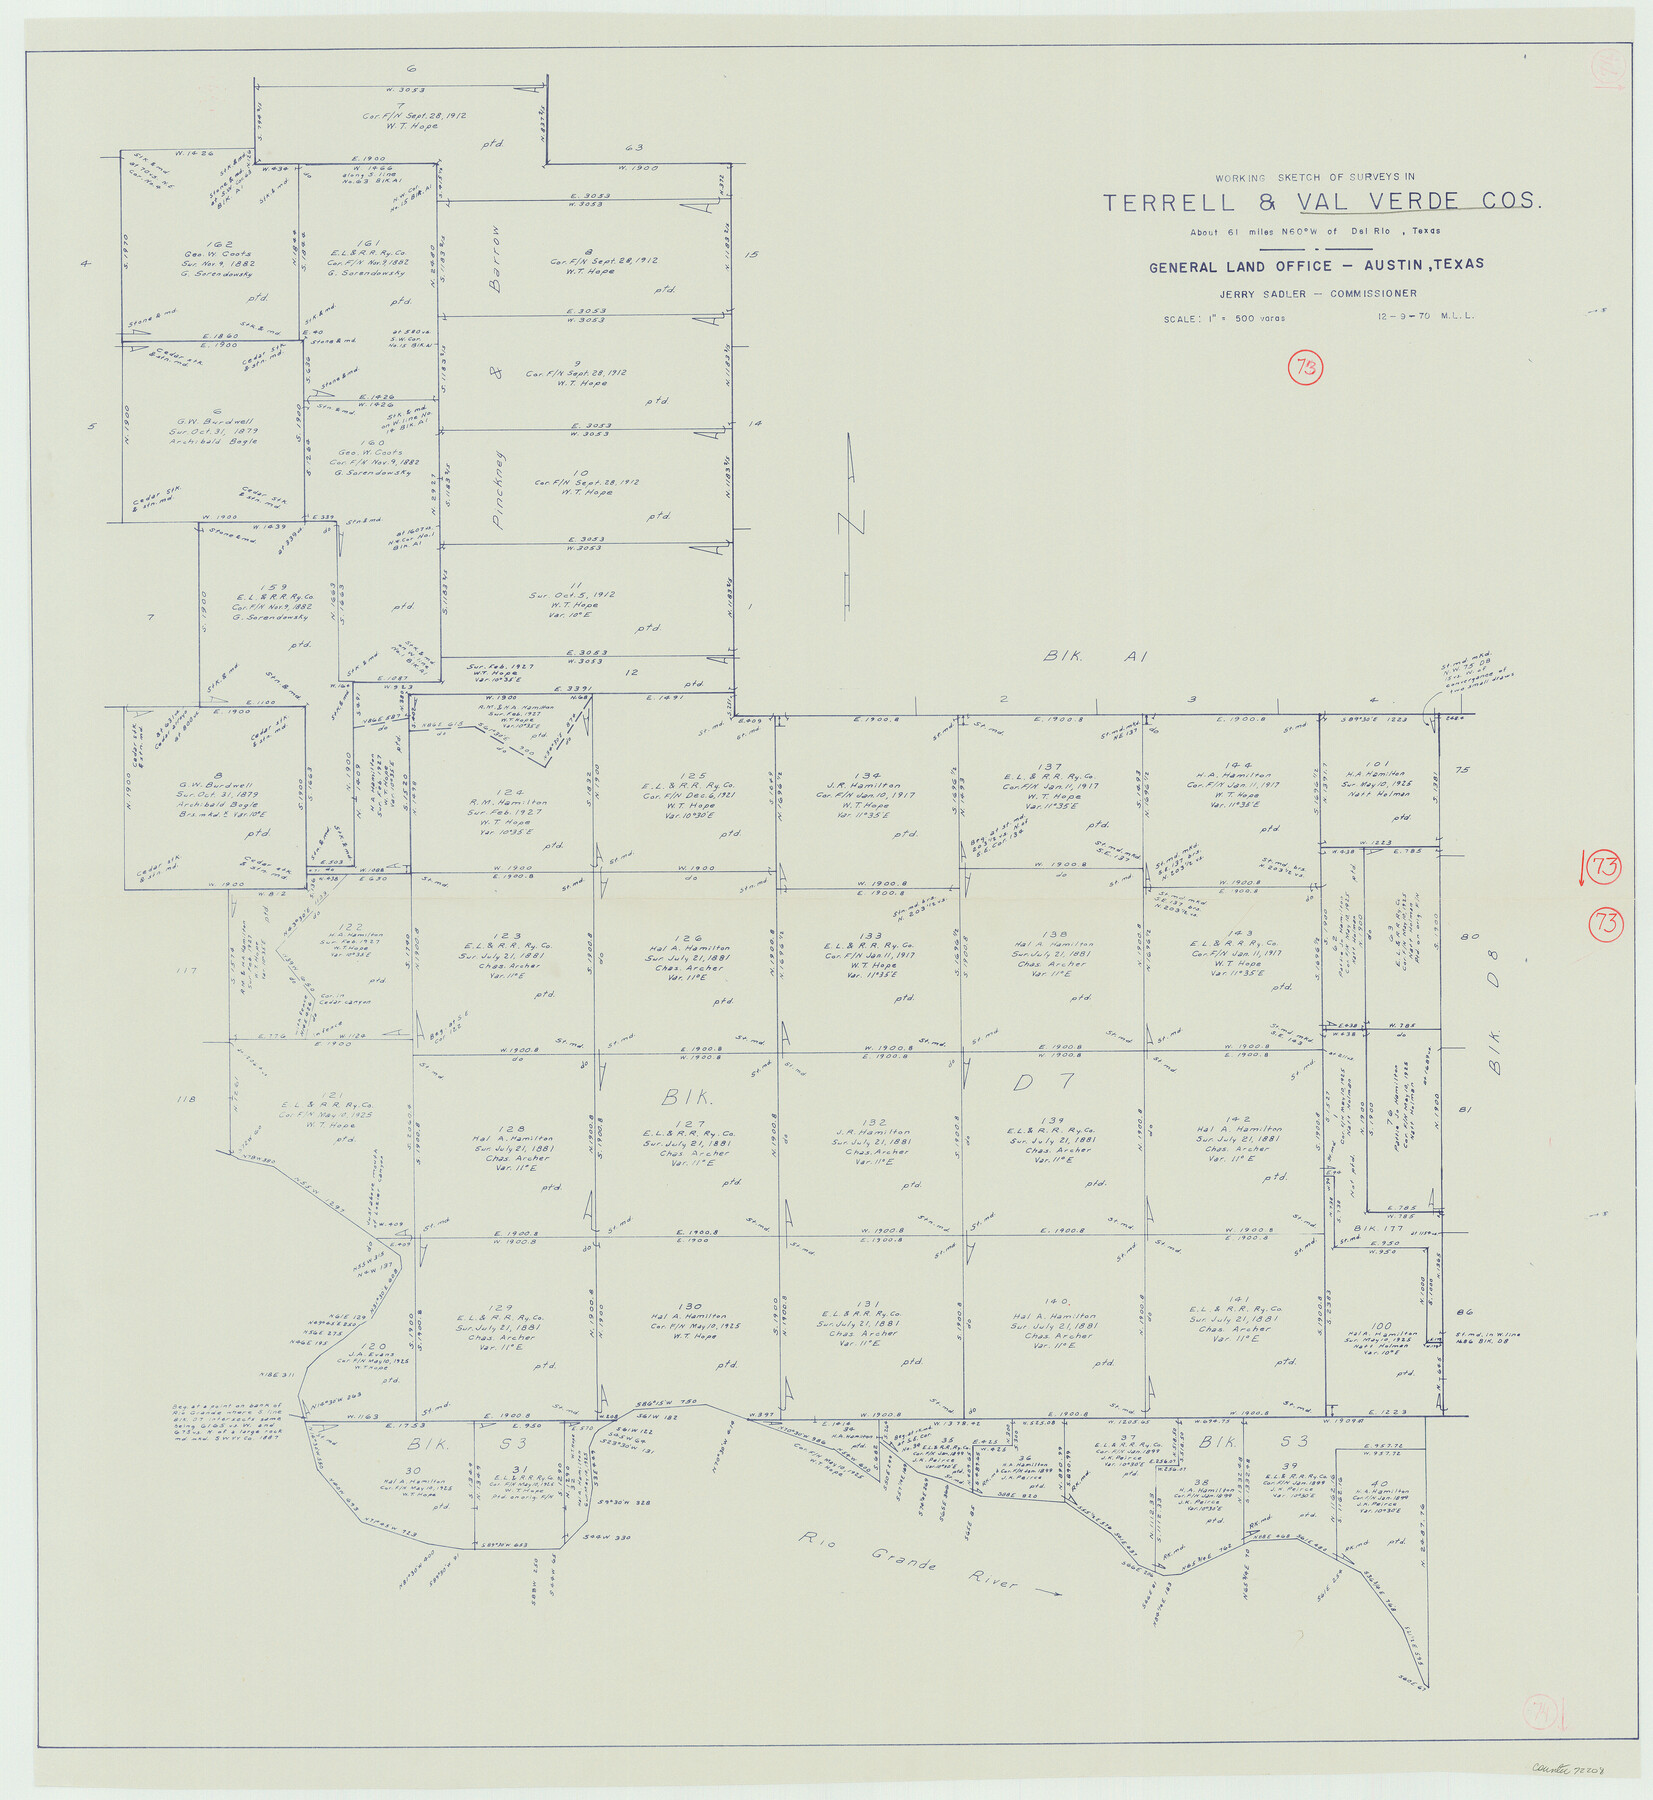 72208, Val Verde County Working Sketch 73, General Map Collection